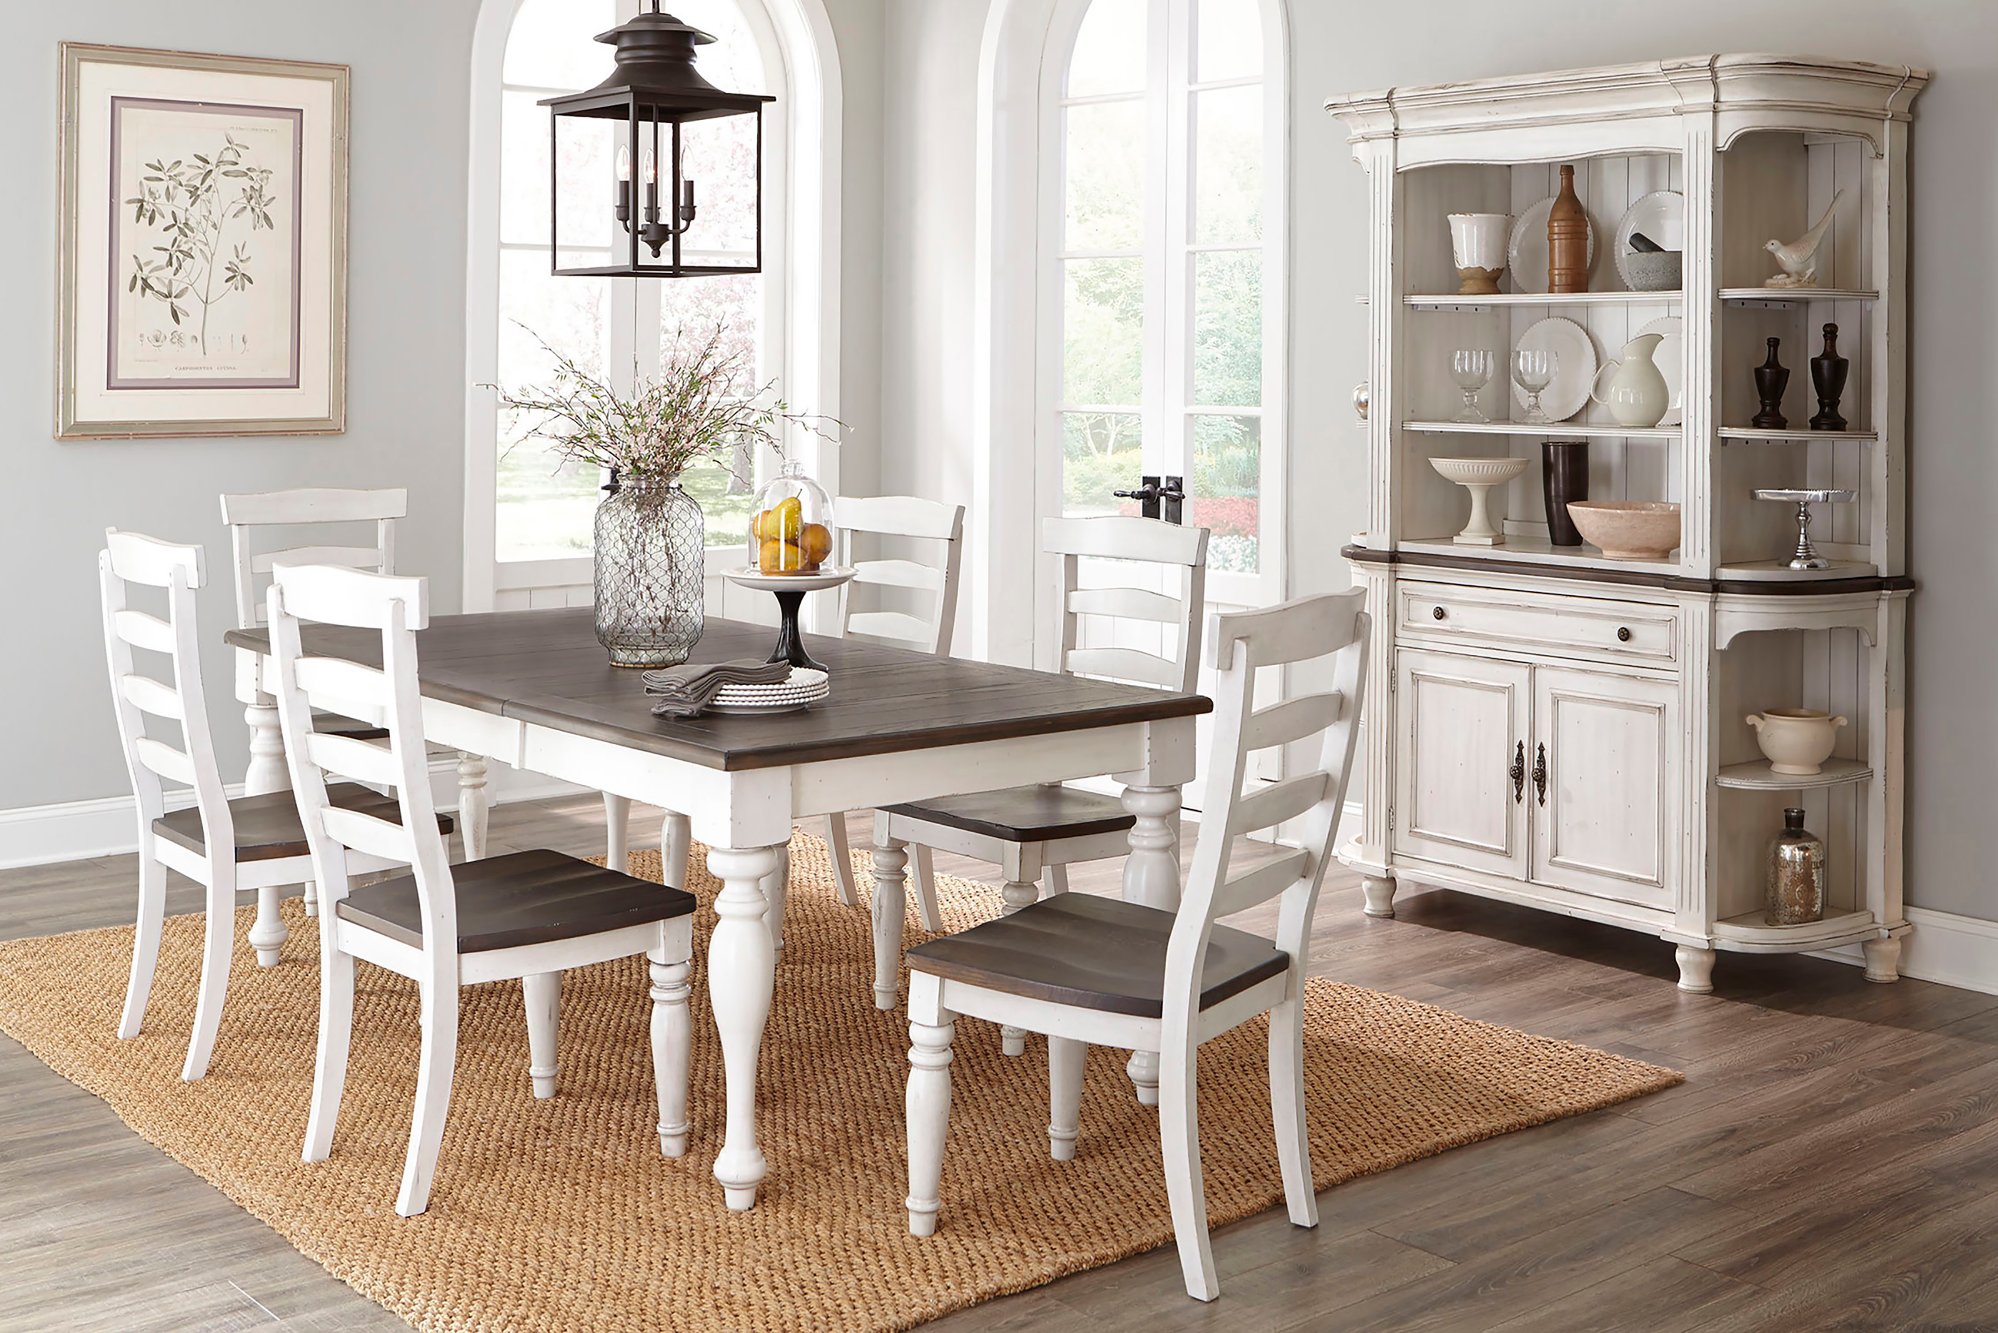 Country French Dining Room Sets - French Country Dining Set / For a